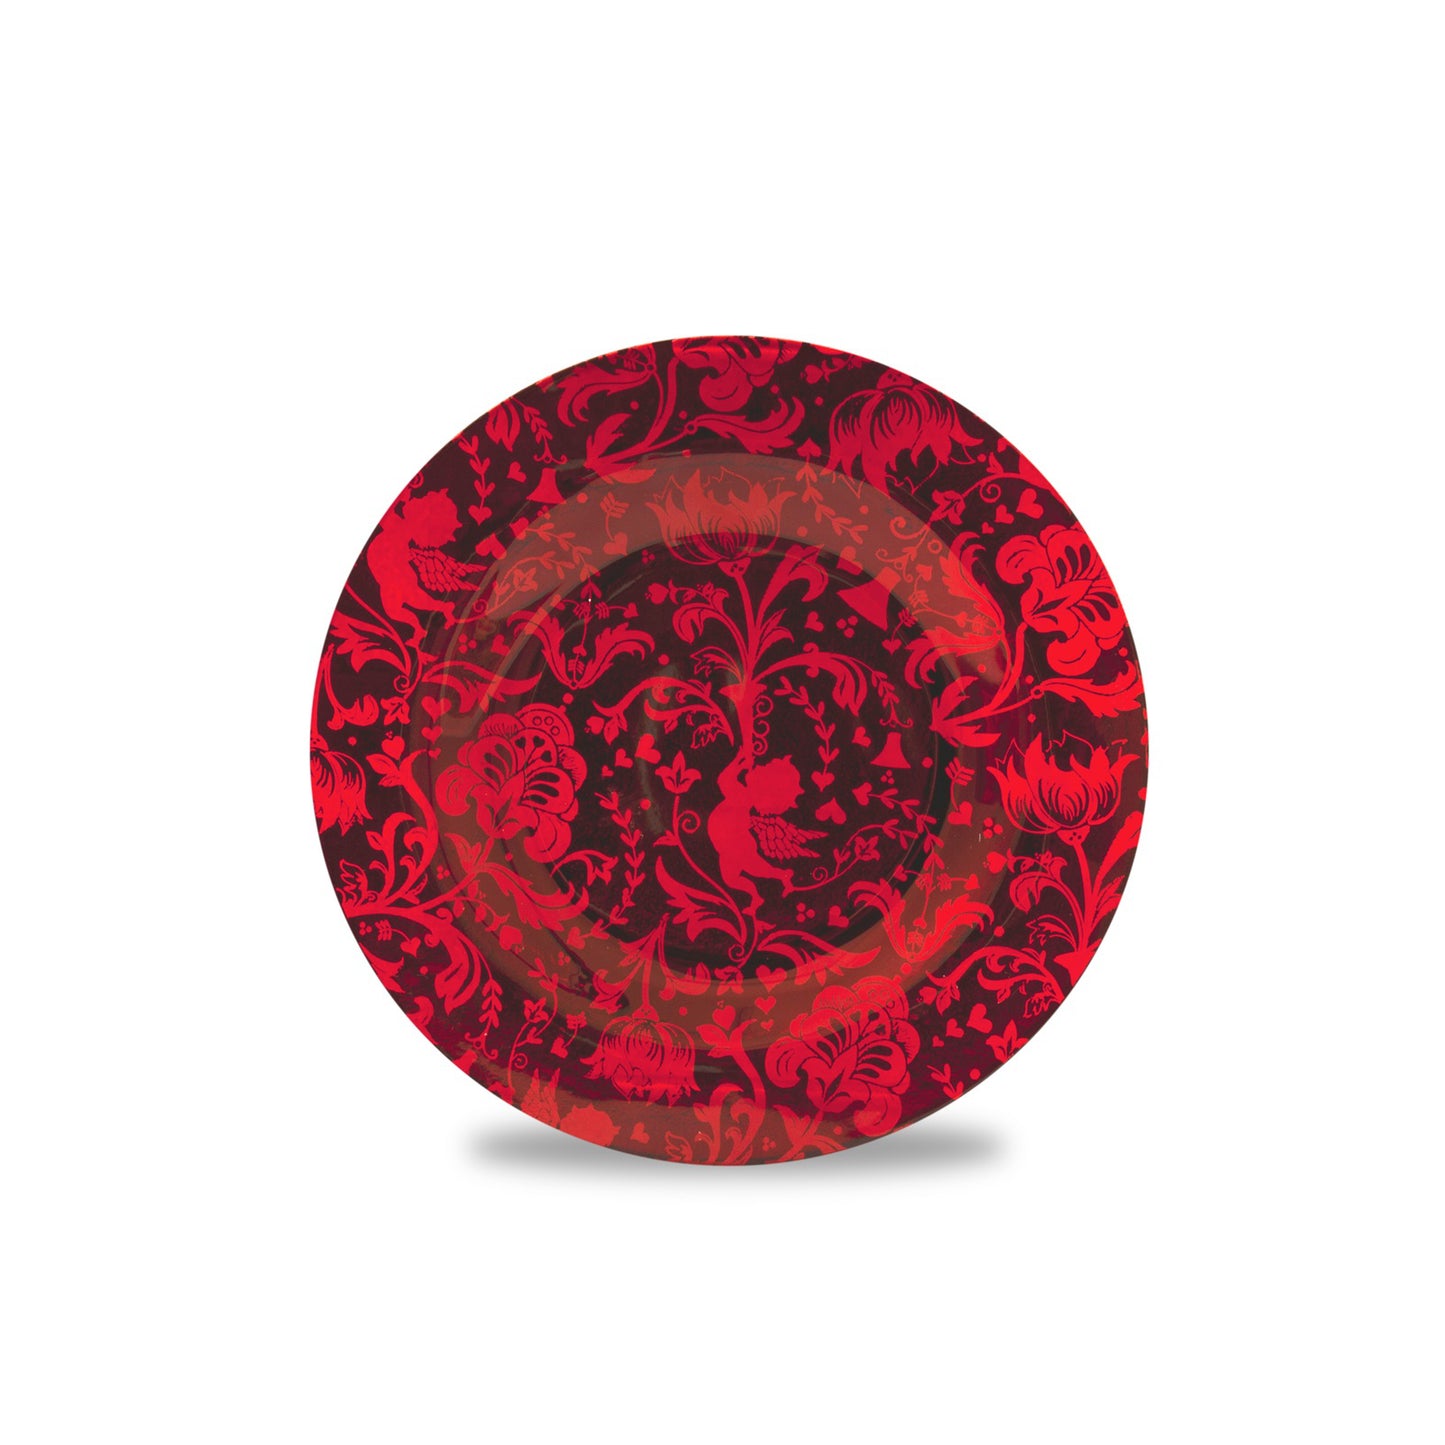 Red Glass Candle Plate from Heart & Home